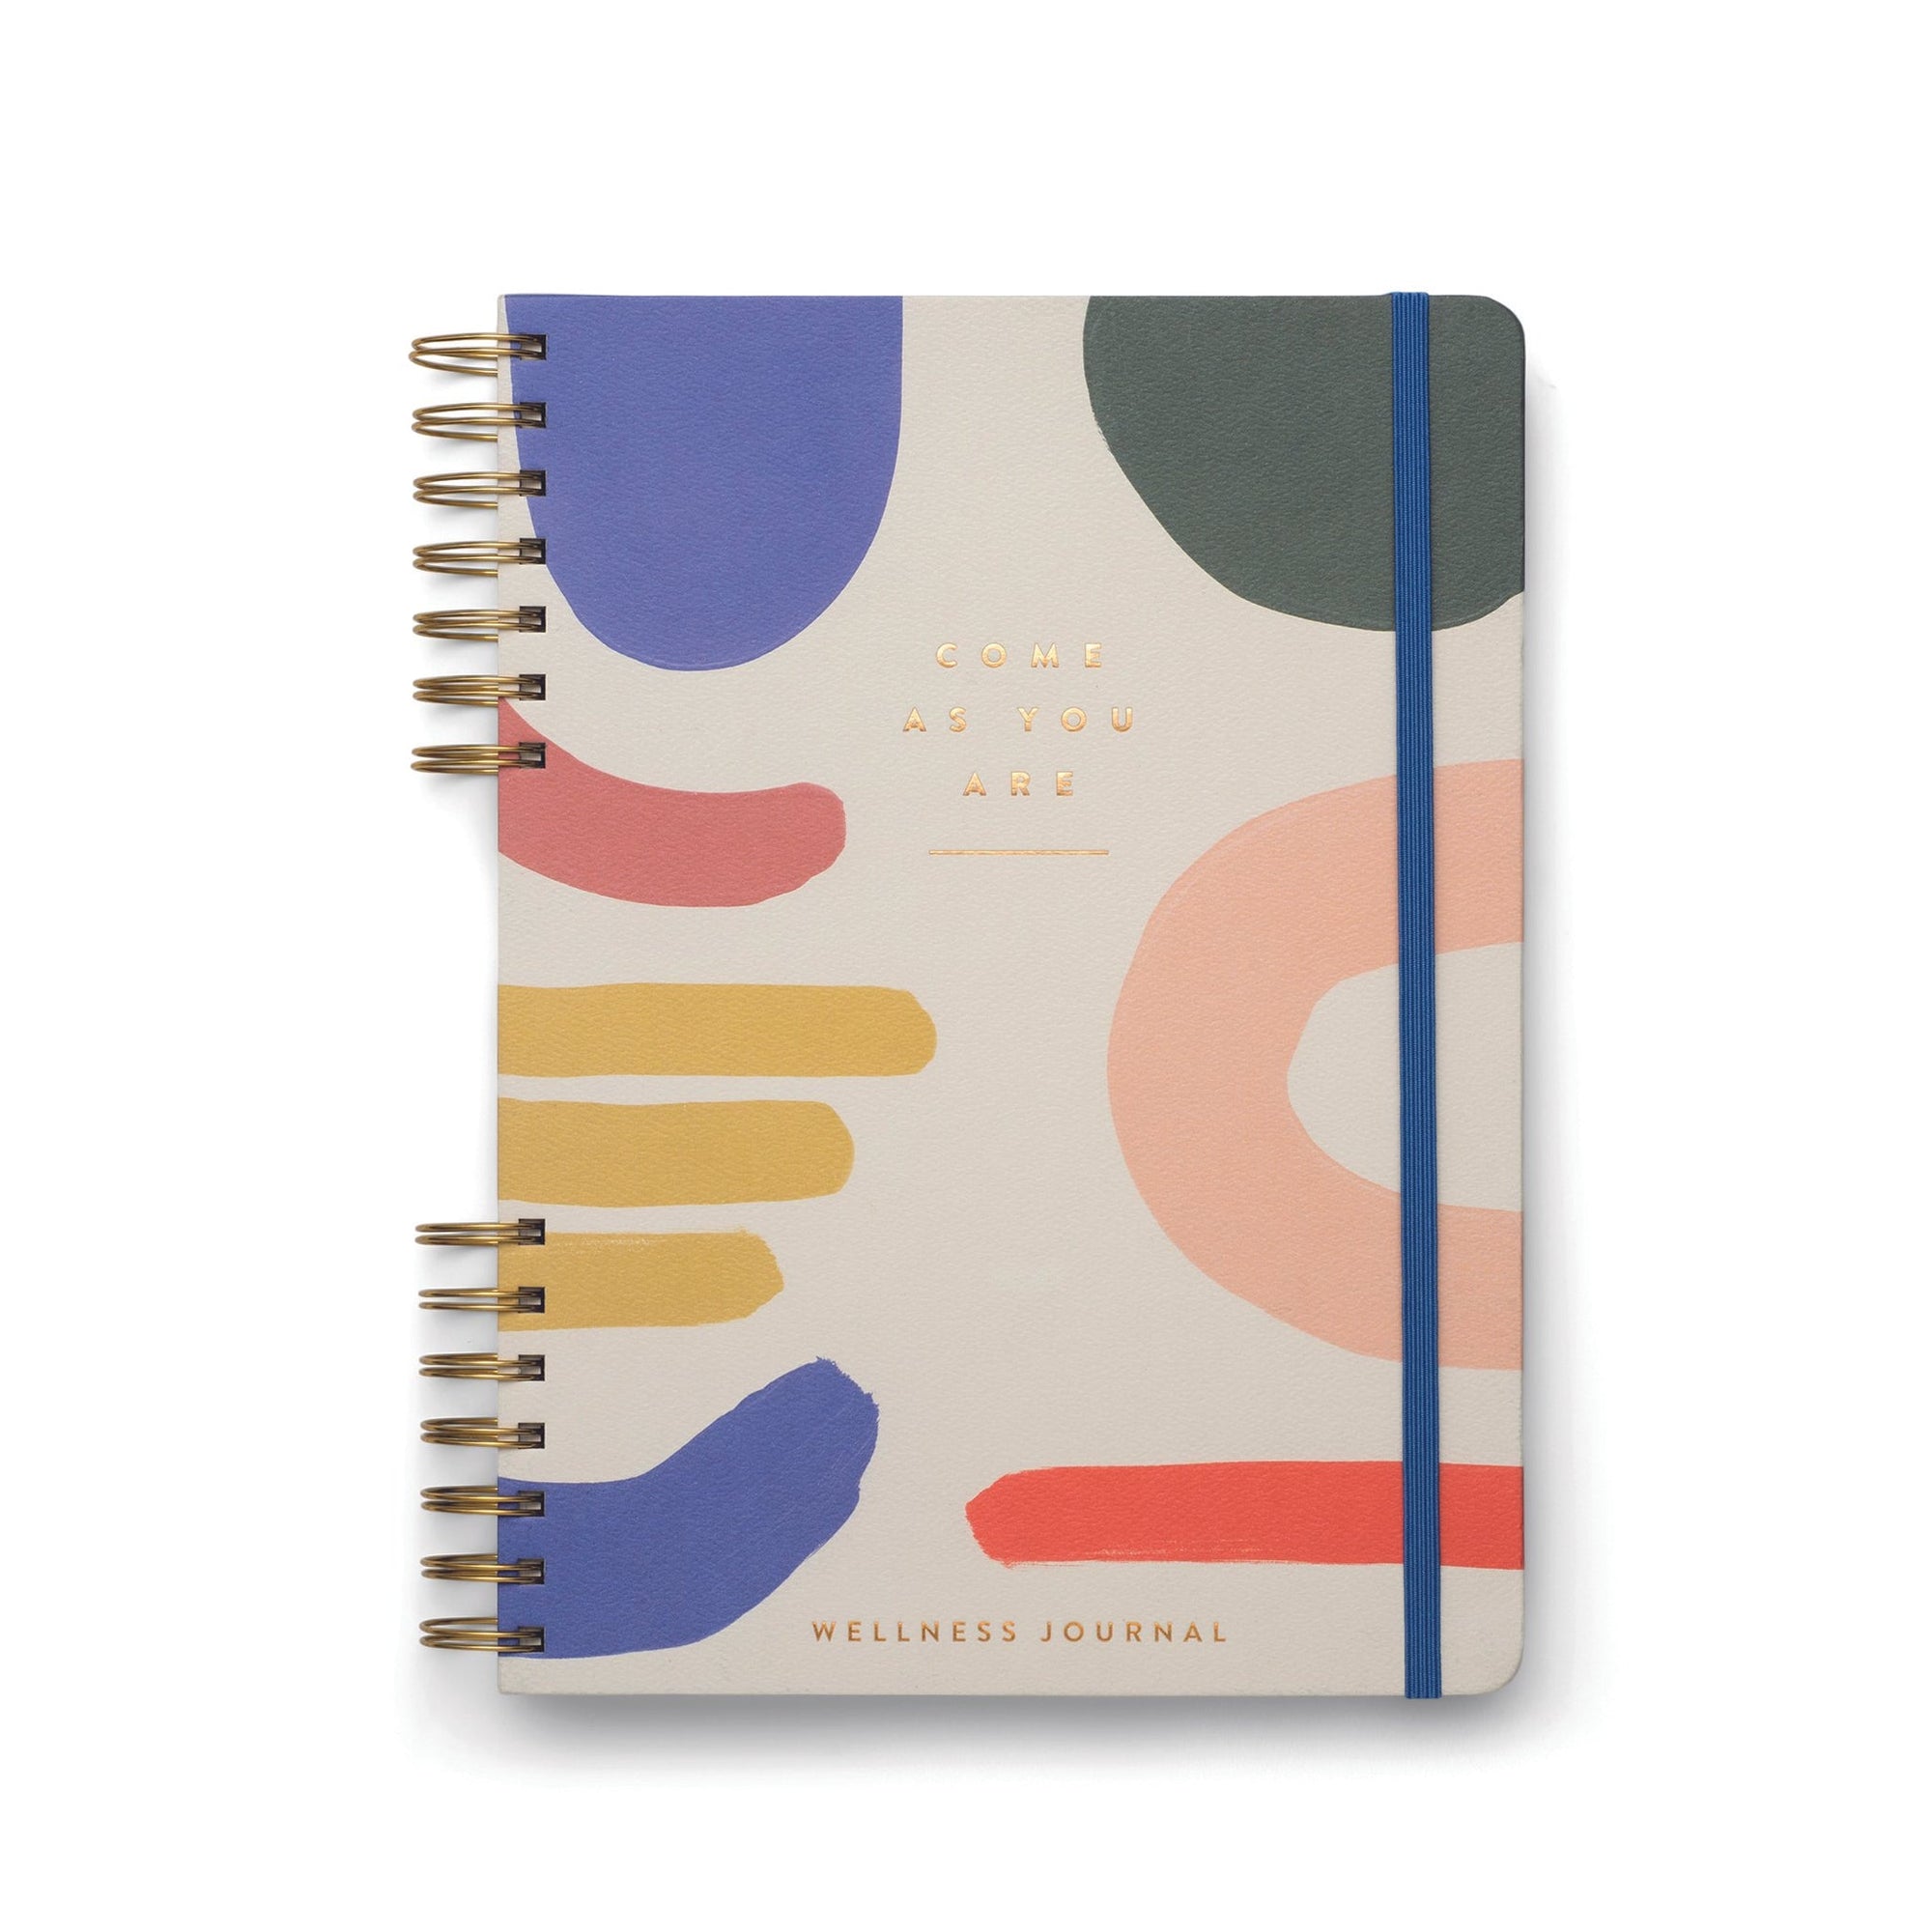 DesignWorks Ink Guided Wellness Journal | "Come As You Are"